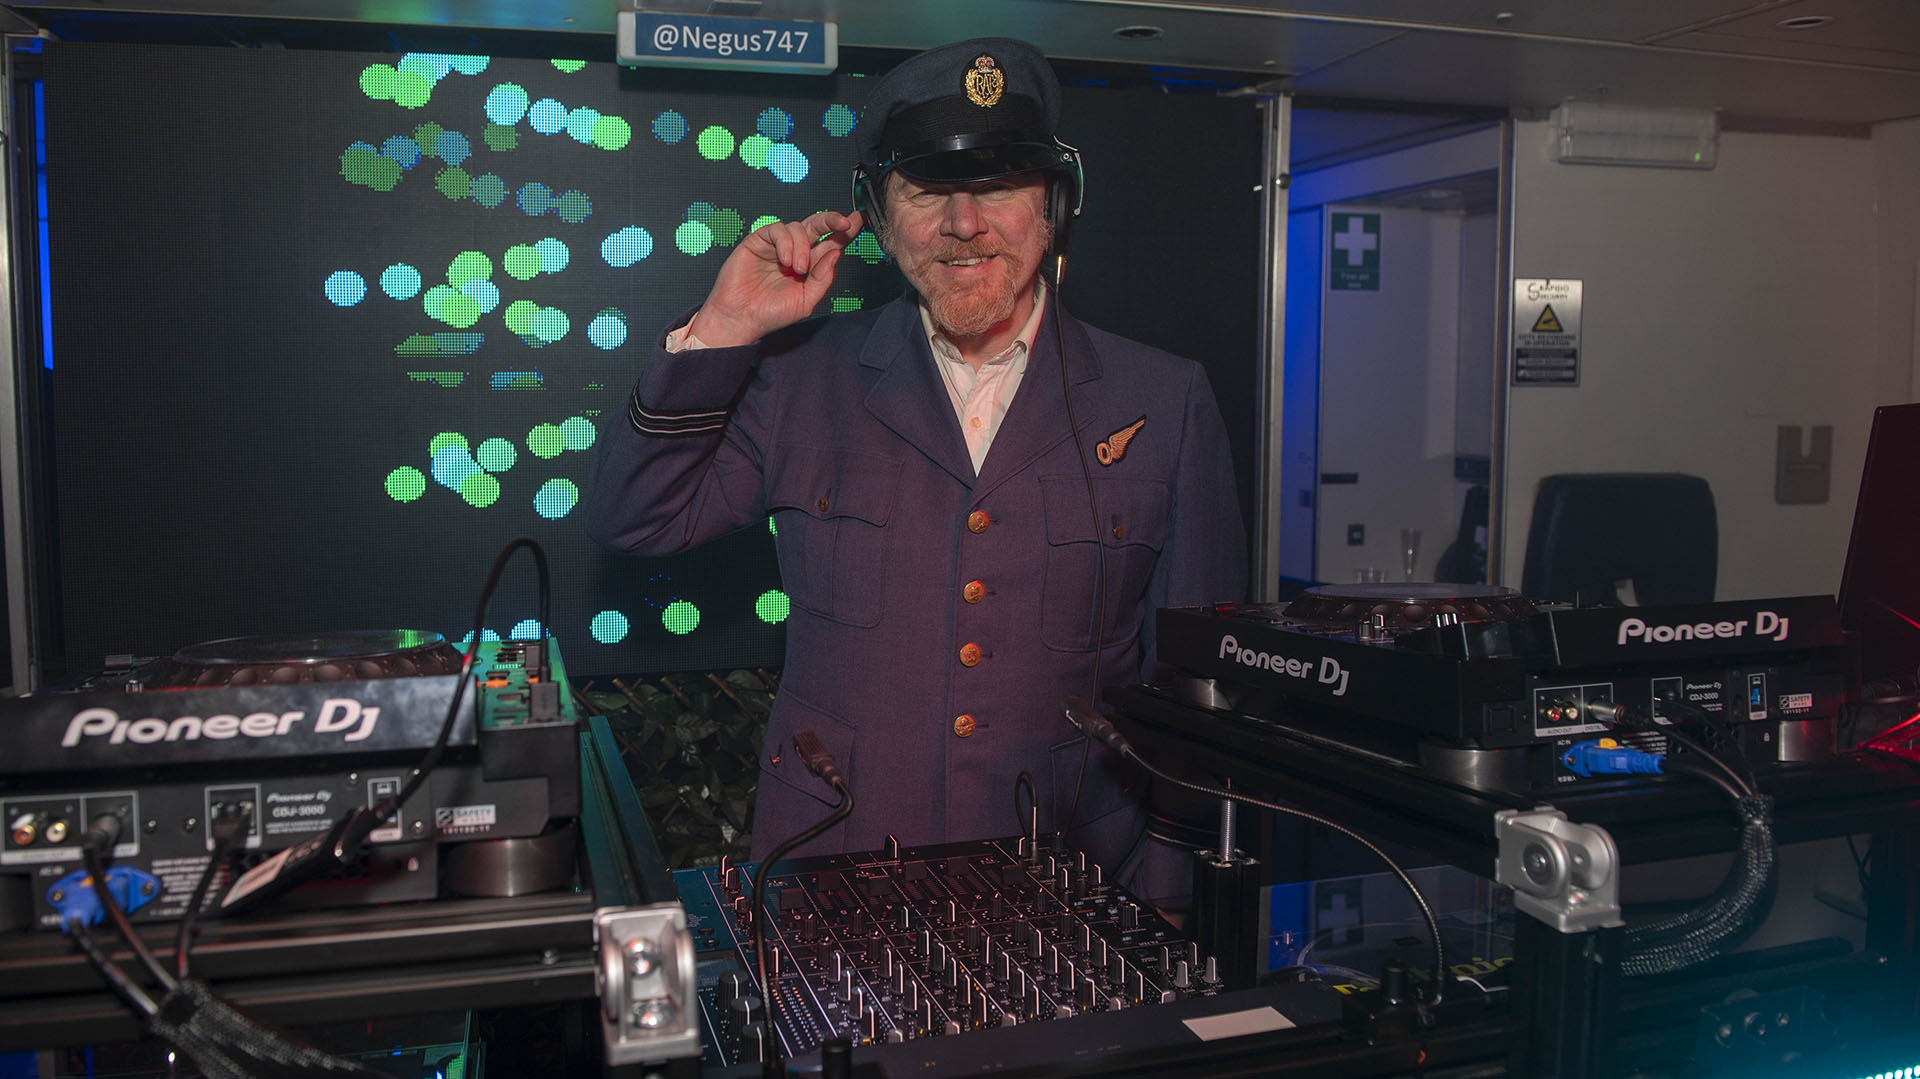 The event plane also has a stand for the DJ to play music throughout the night.  (Photo by Stuart C. Wilson/Getty Images for Cotswold Airport Events Ltd.)